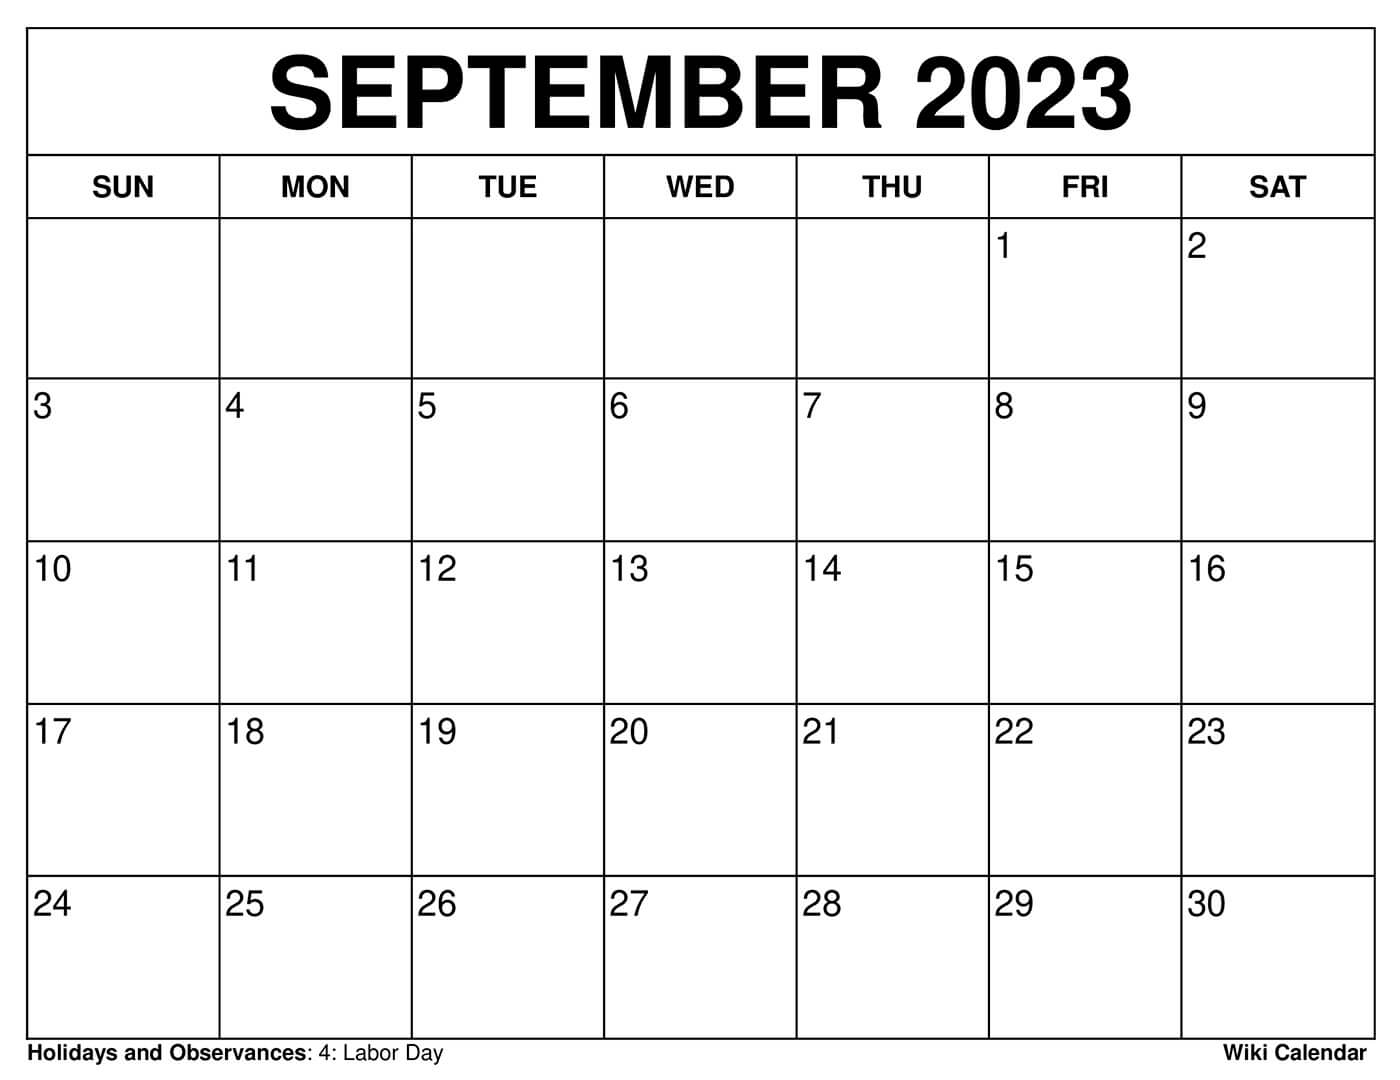 September 2022 Calendar With Notes Free Printable September 2022 Calendars - Wiki Calendar